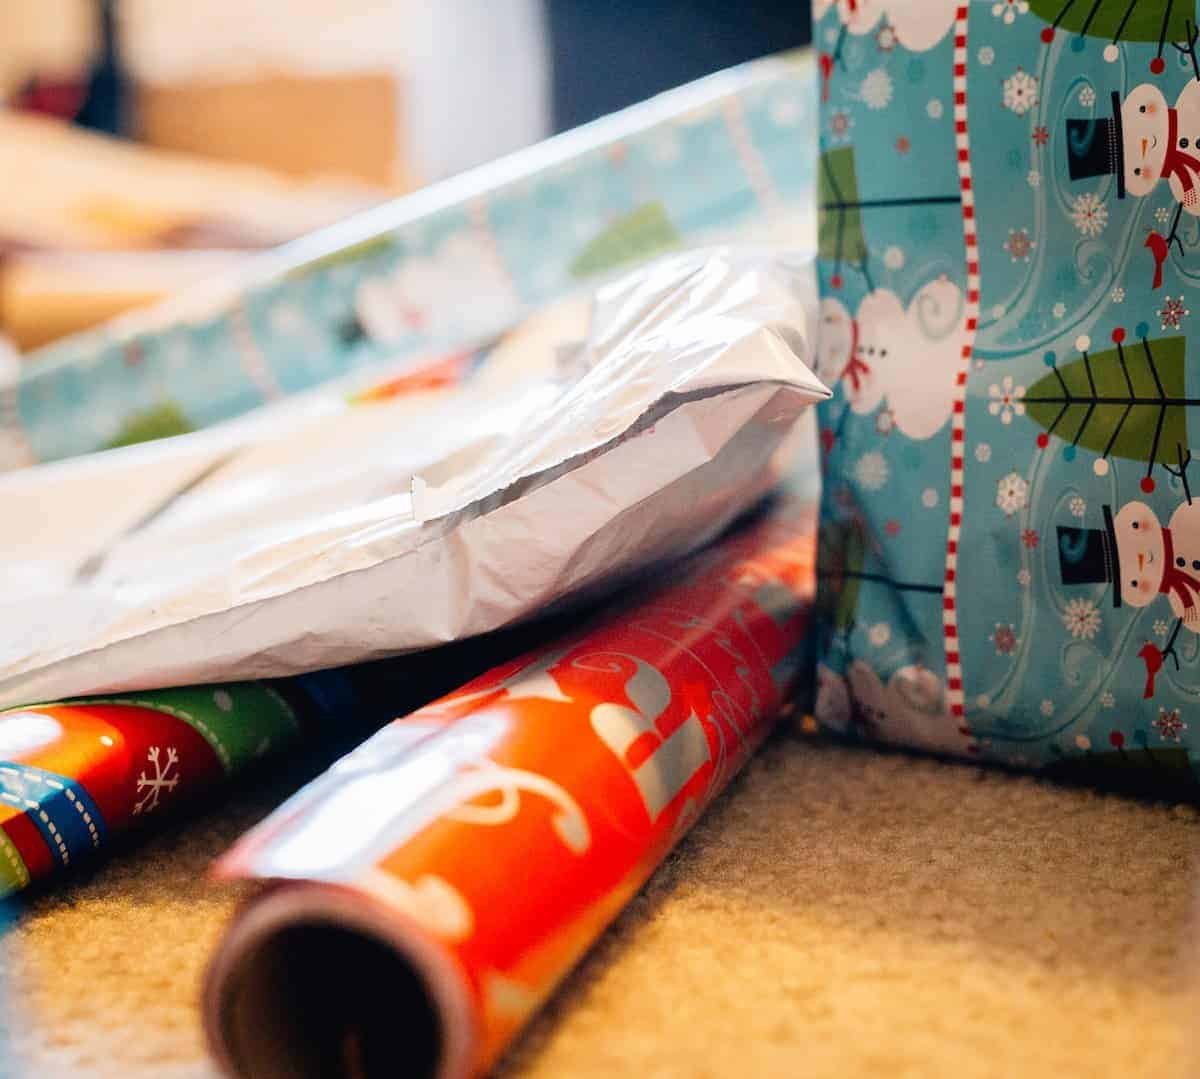 Please Send Wrapped- Why Gift Wrapping Shouldn't Be Optional